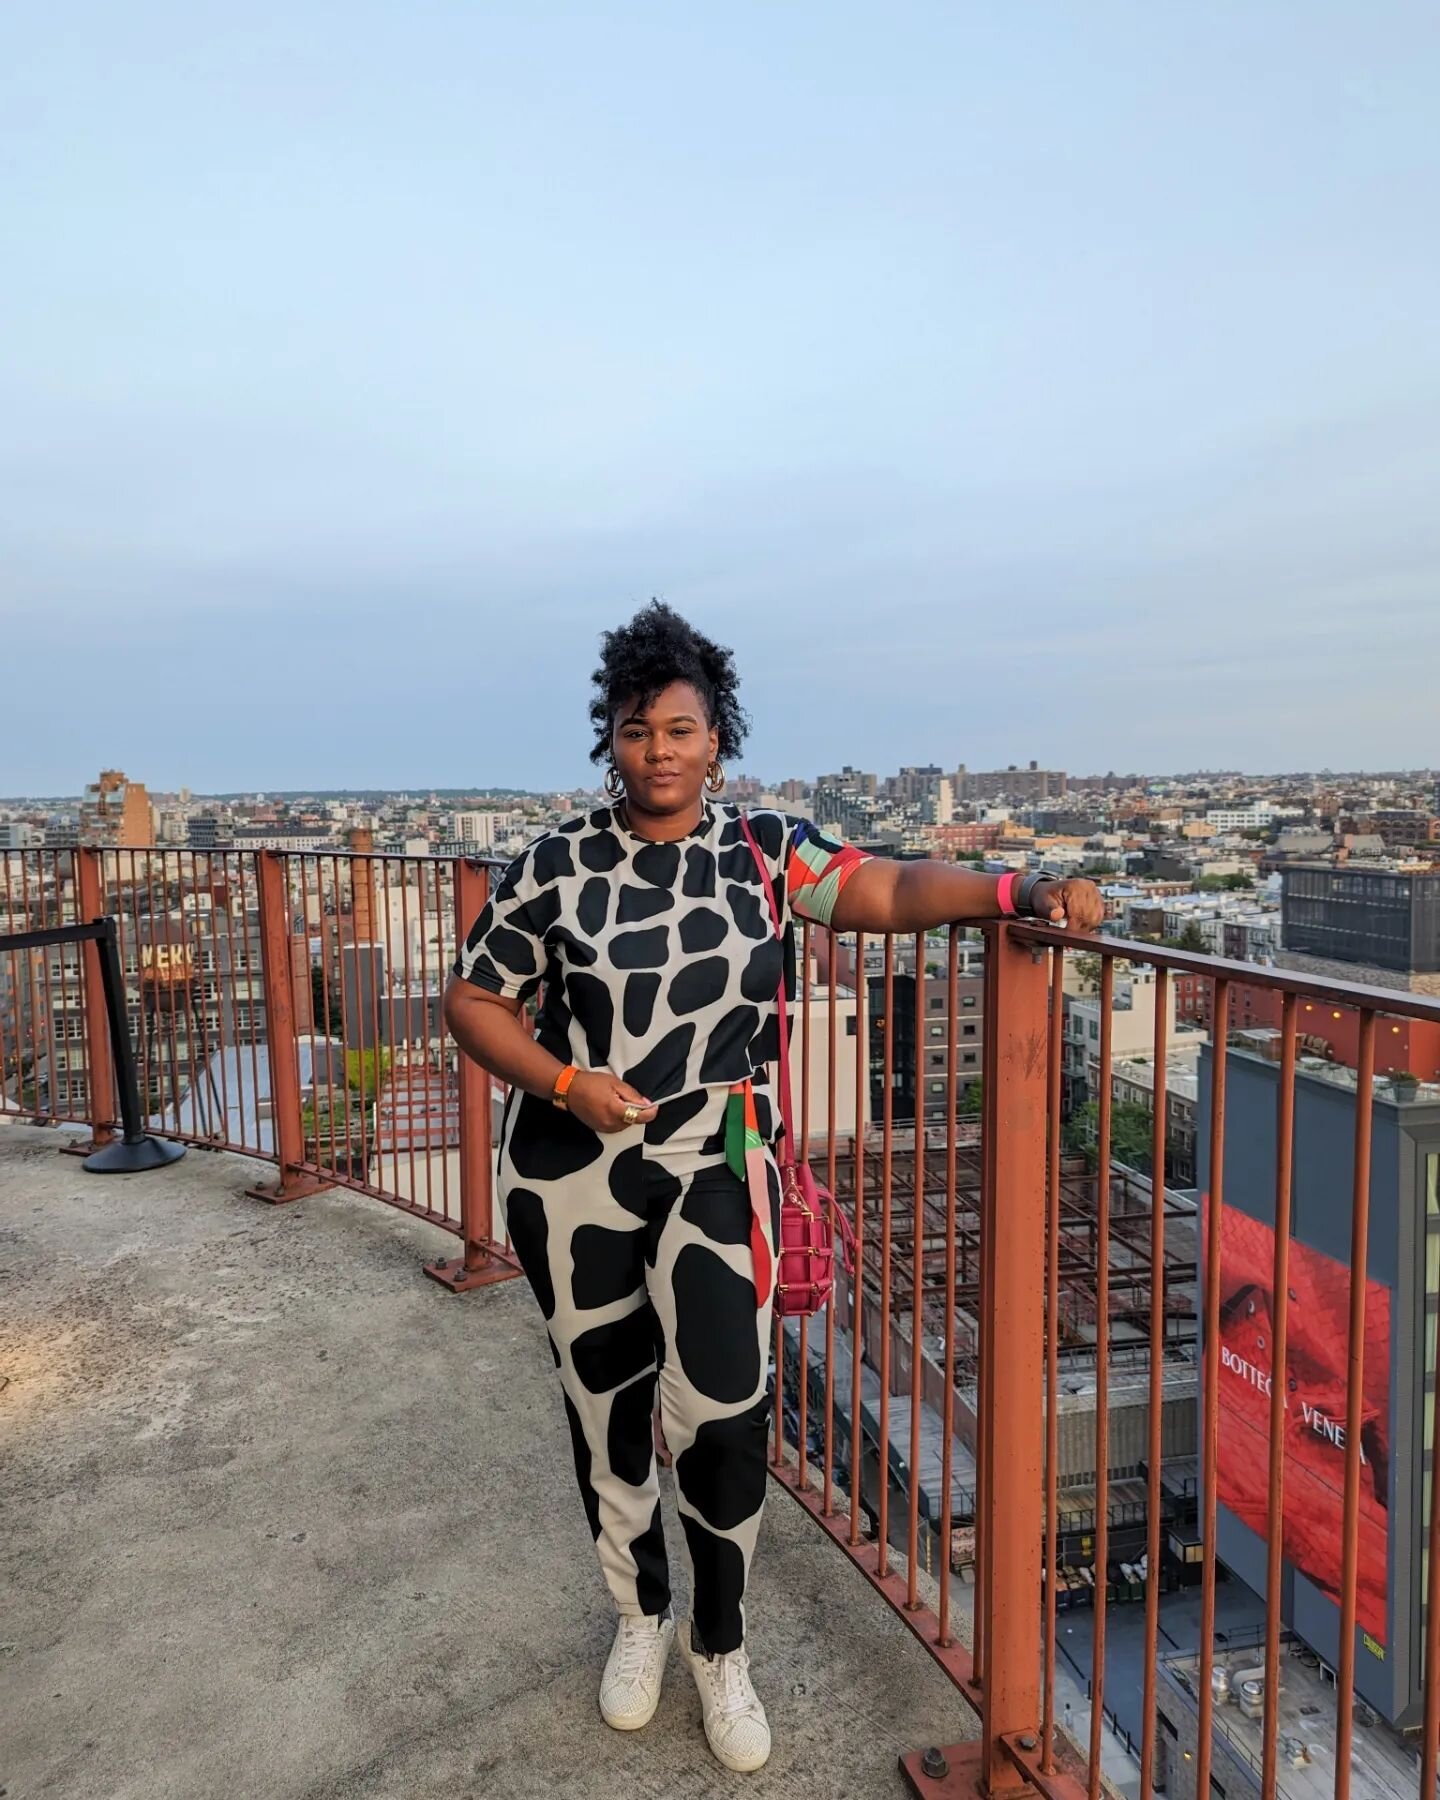 Spent the evening with my Google Pixel Family in Brooklyn last night. ⁣
⁣
Can't wait to share what's in store! ⁣SB the Views from the Water Tower in Williamsburg are top tier! 
⁣
#googlepixel #teampixel #nyccreators #Blackcontentcreators